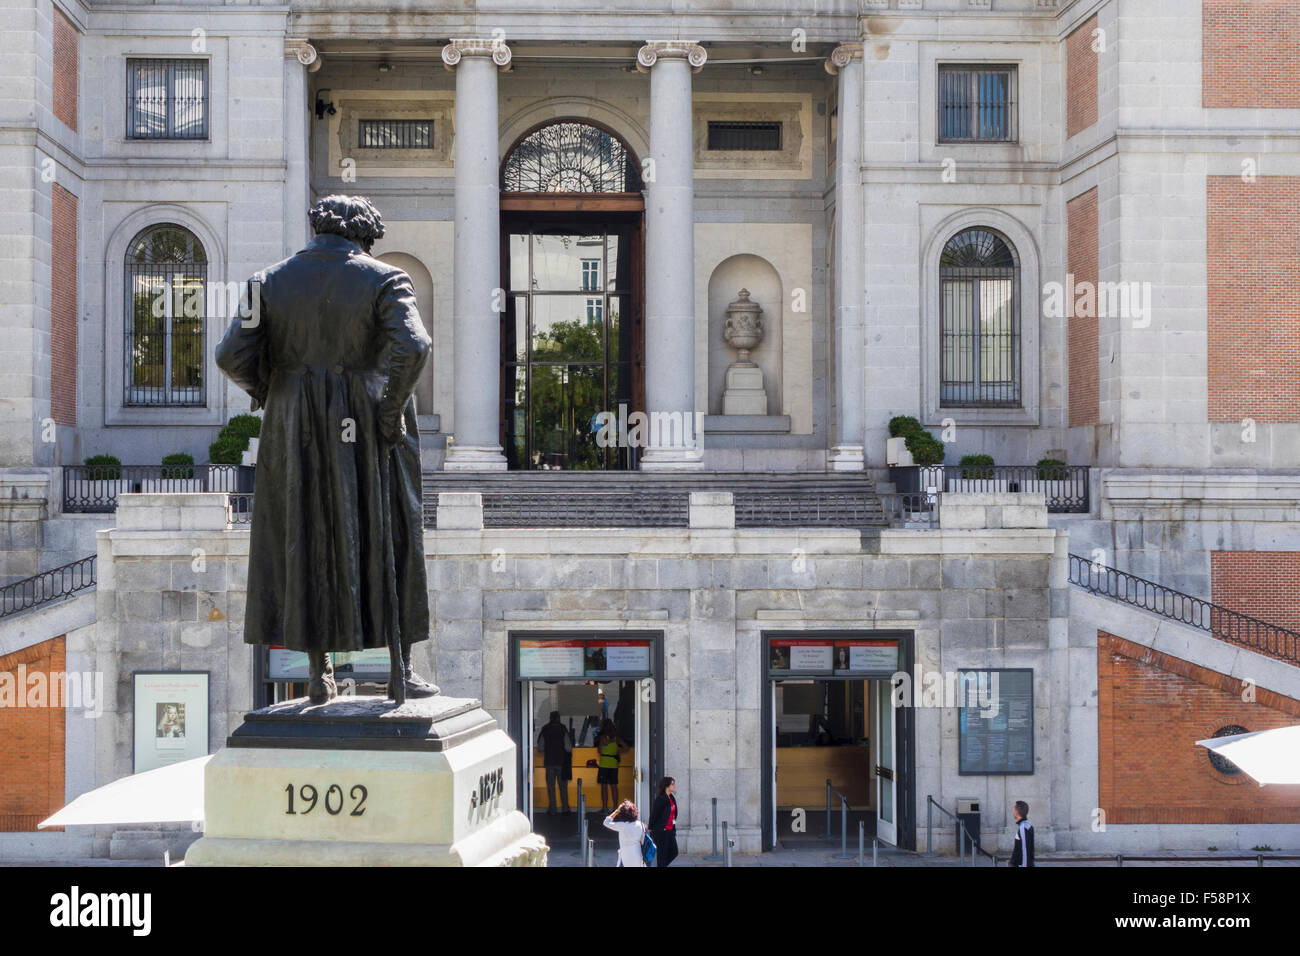 Statue to famous painter Goya outside the entrance to the Prado Museum Art Gallery in Madrid, Spain, Europe Stock Photo